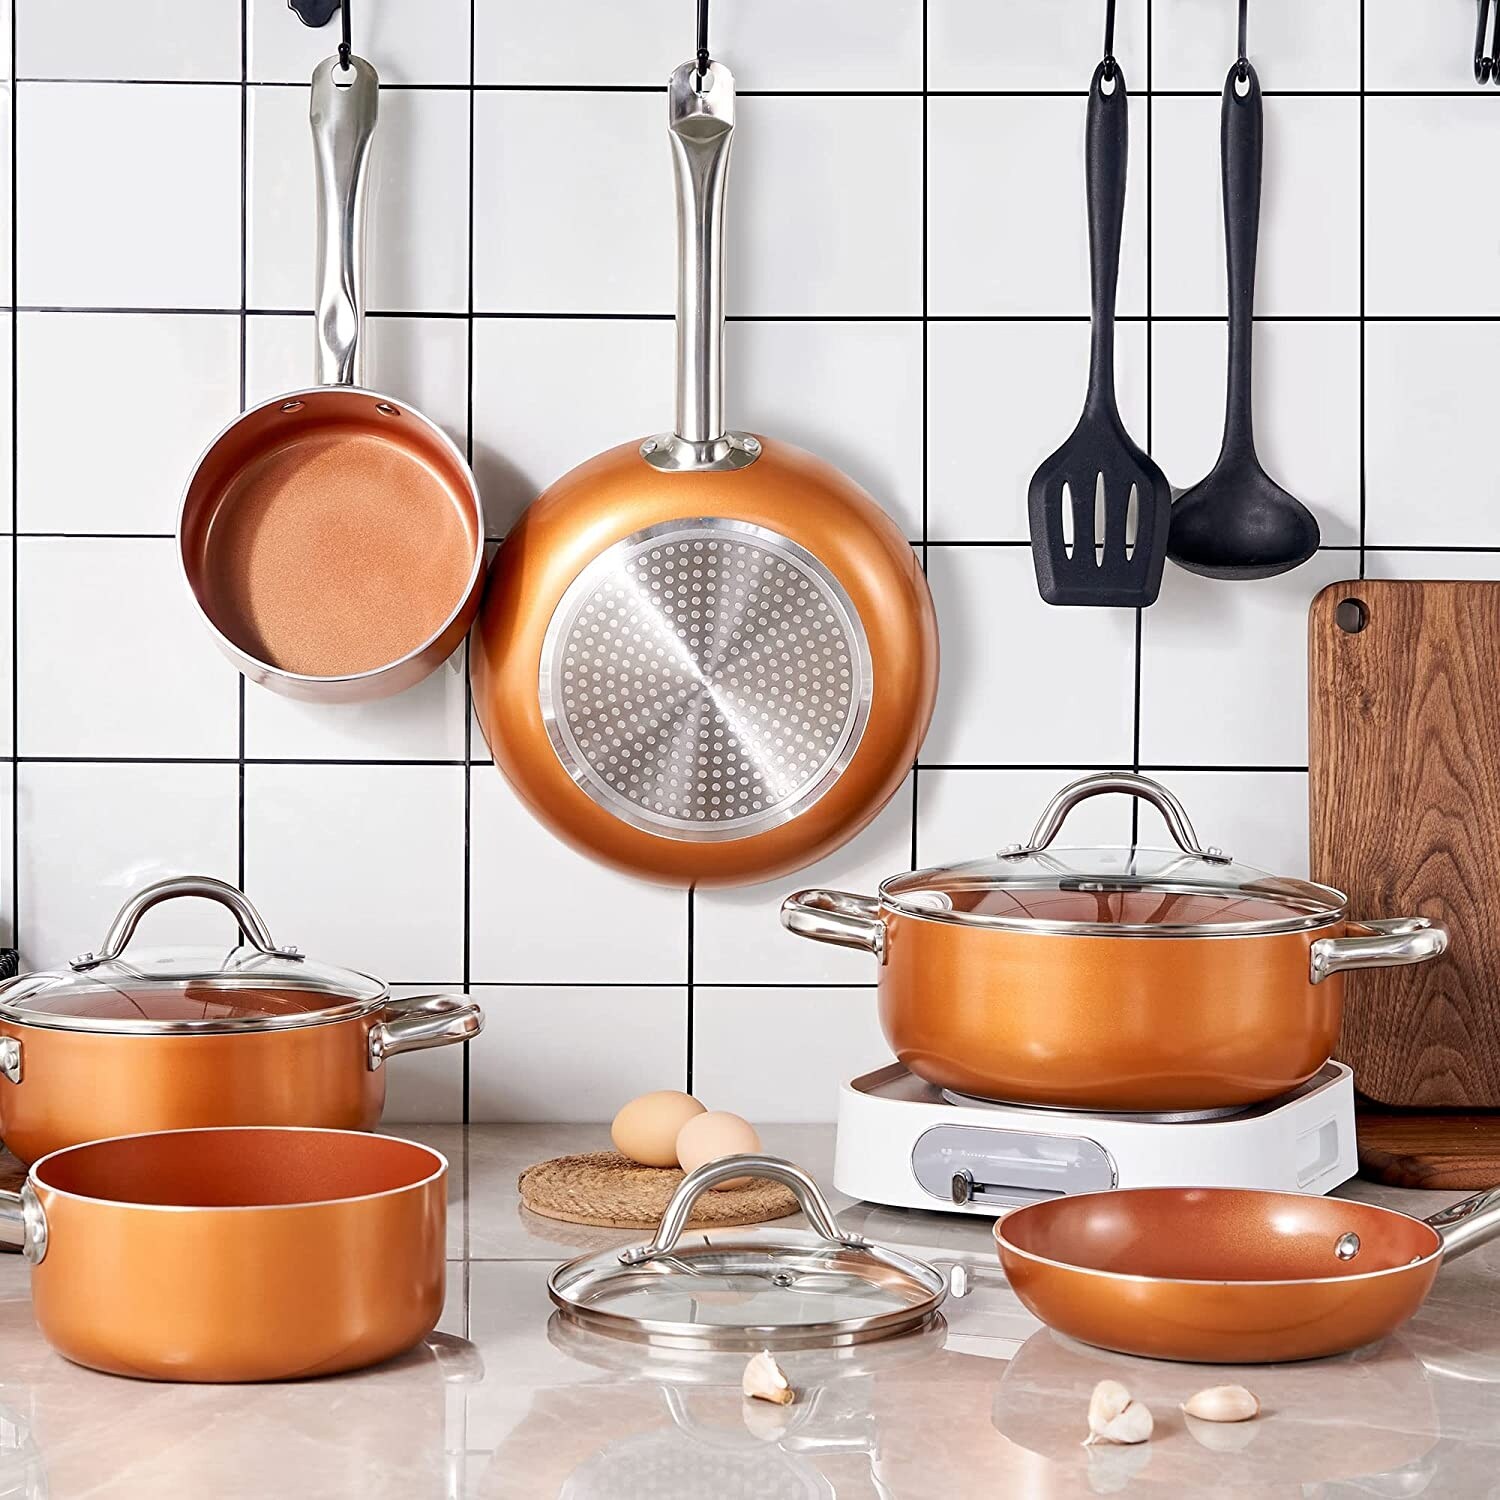 Copper Pots and Pans Set, 10 Piece Nonstick Chef Cookware Set with Ceramic  Coating, No Assembly Required Stainless Steel Handles - Bed Bath & Beyond -  37508865